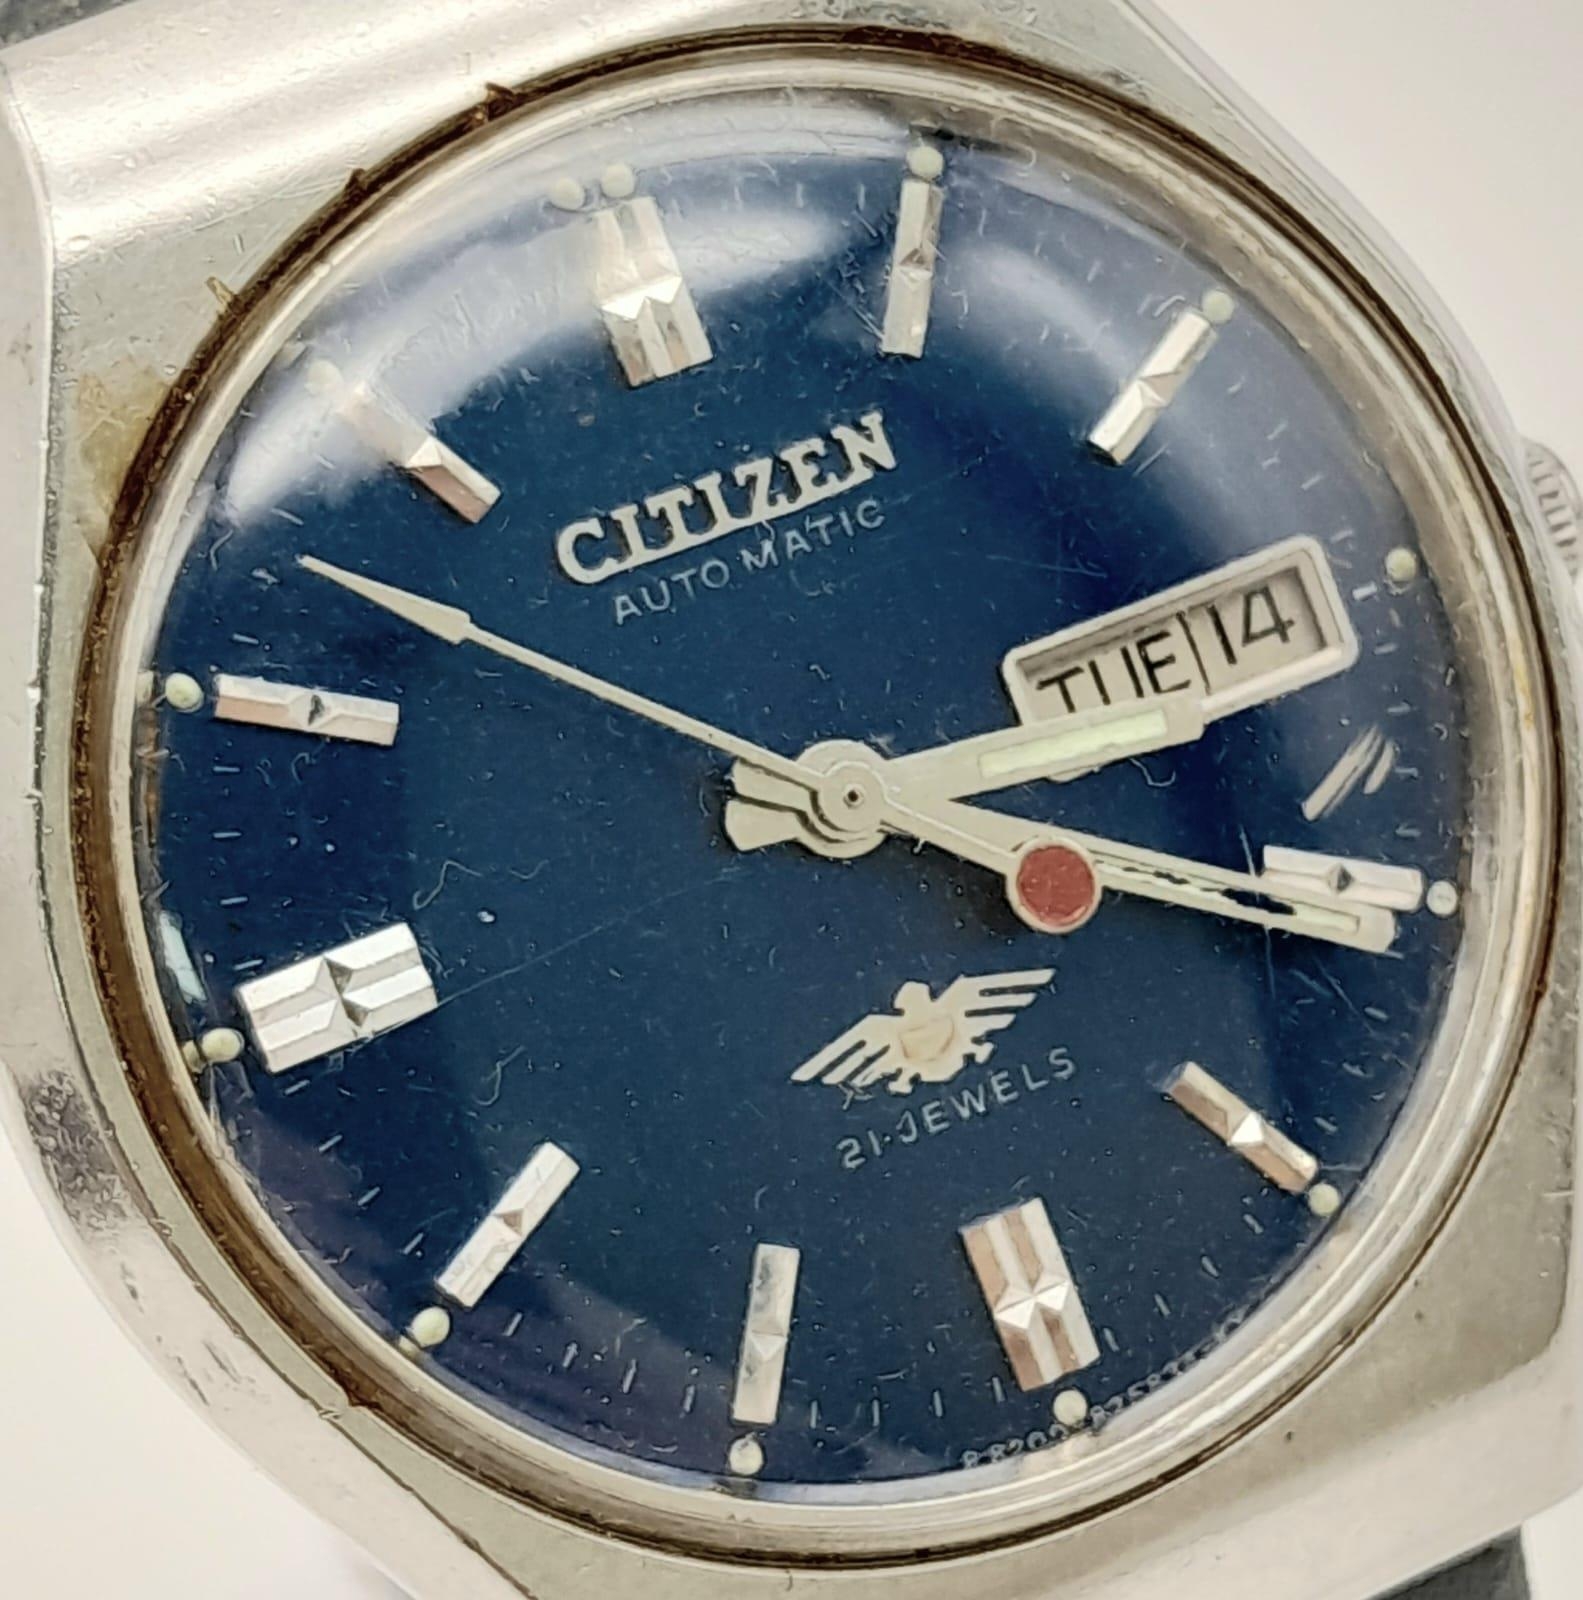 A Vintage Citizen 21 Jewel Automatic Gents Watch. Blue leather strap. Stainless steel case - 36mm. - Image 2 of 6